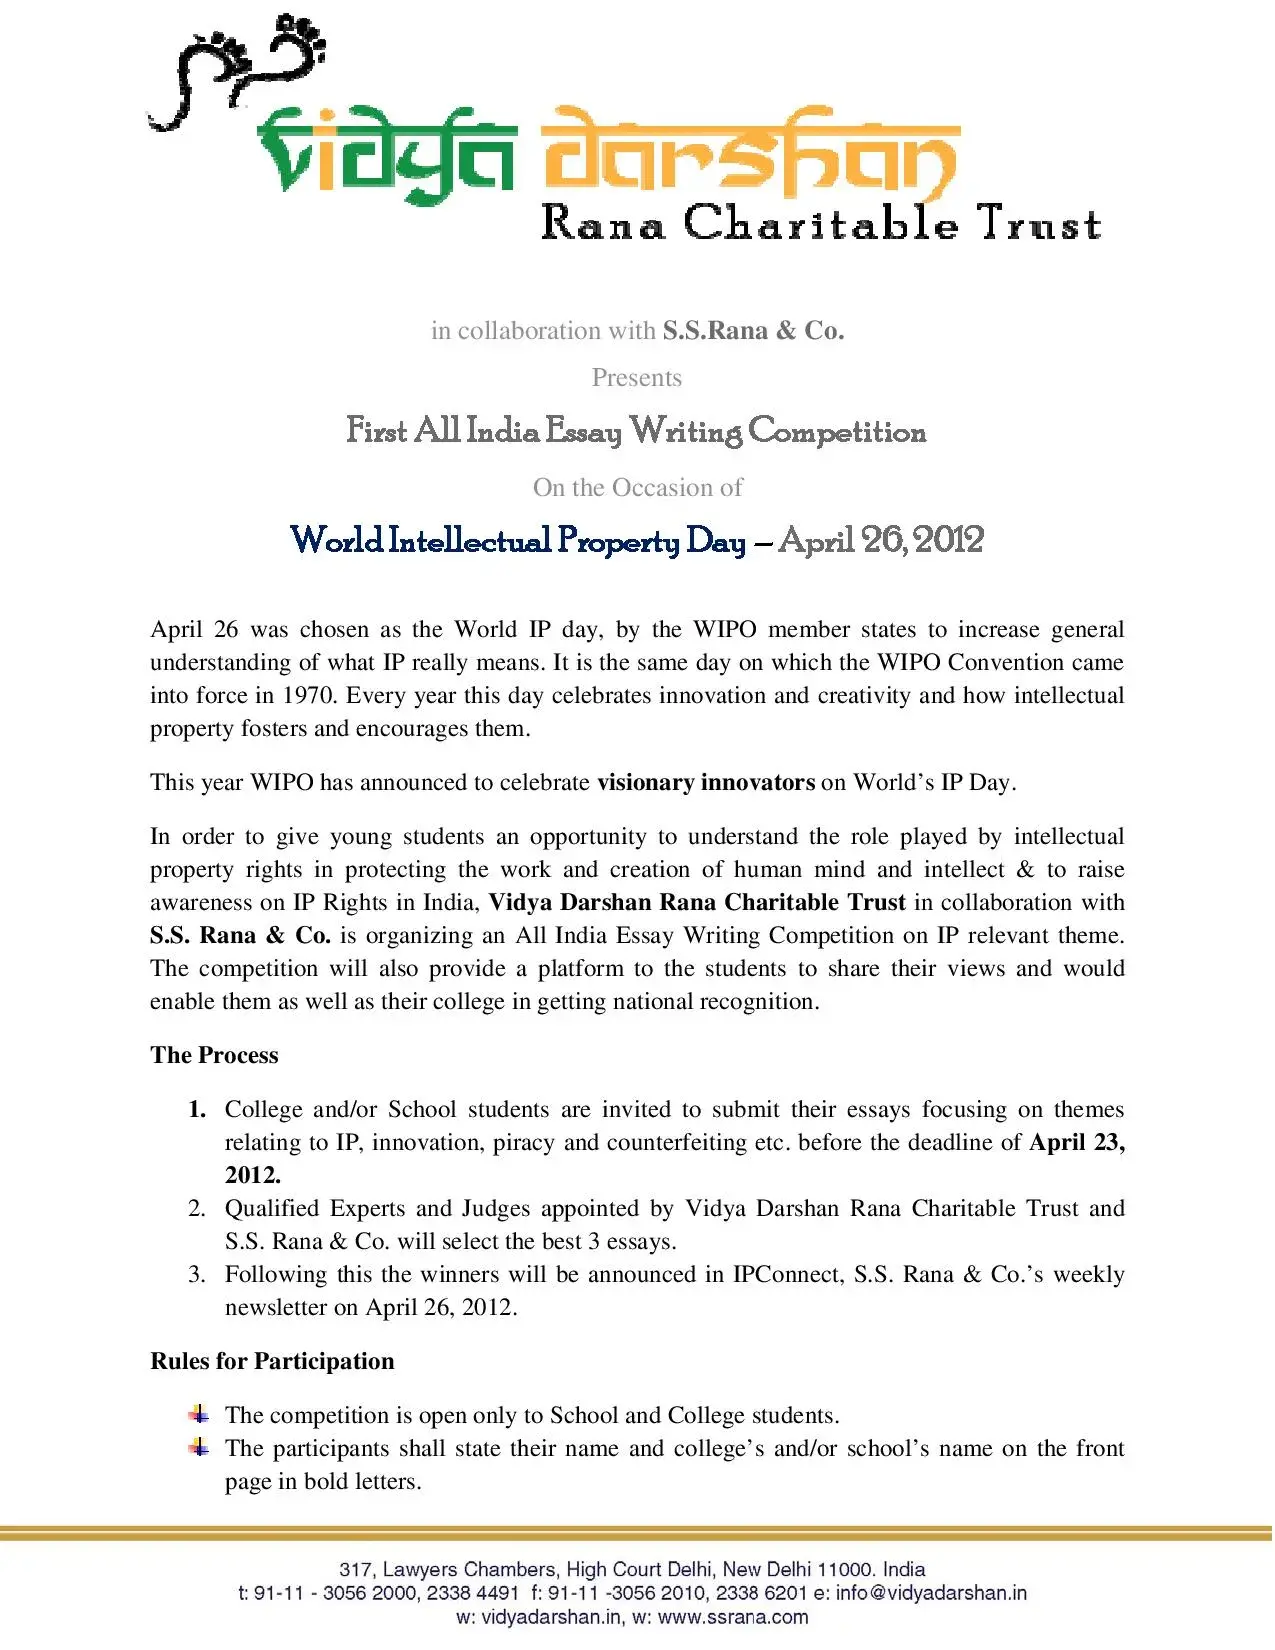 All India Essay Competition